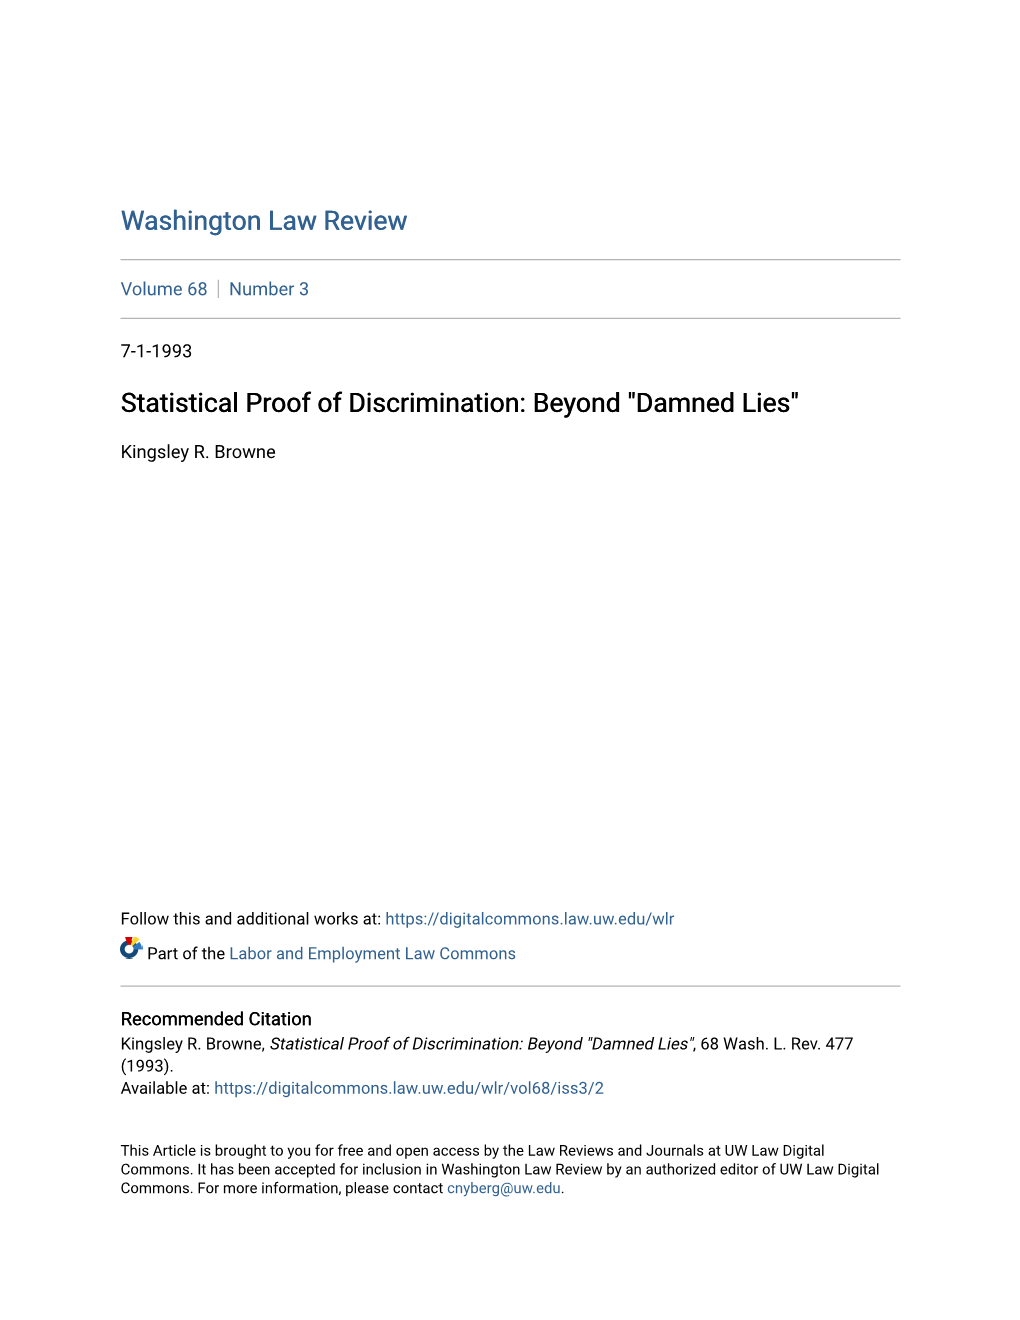 Statistical Proof of Discrimination: Beyond "Damned Lies"